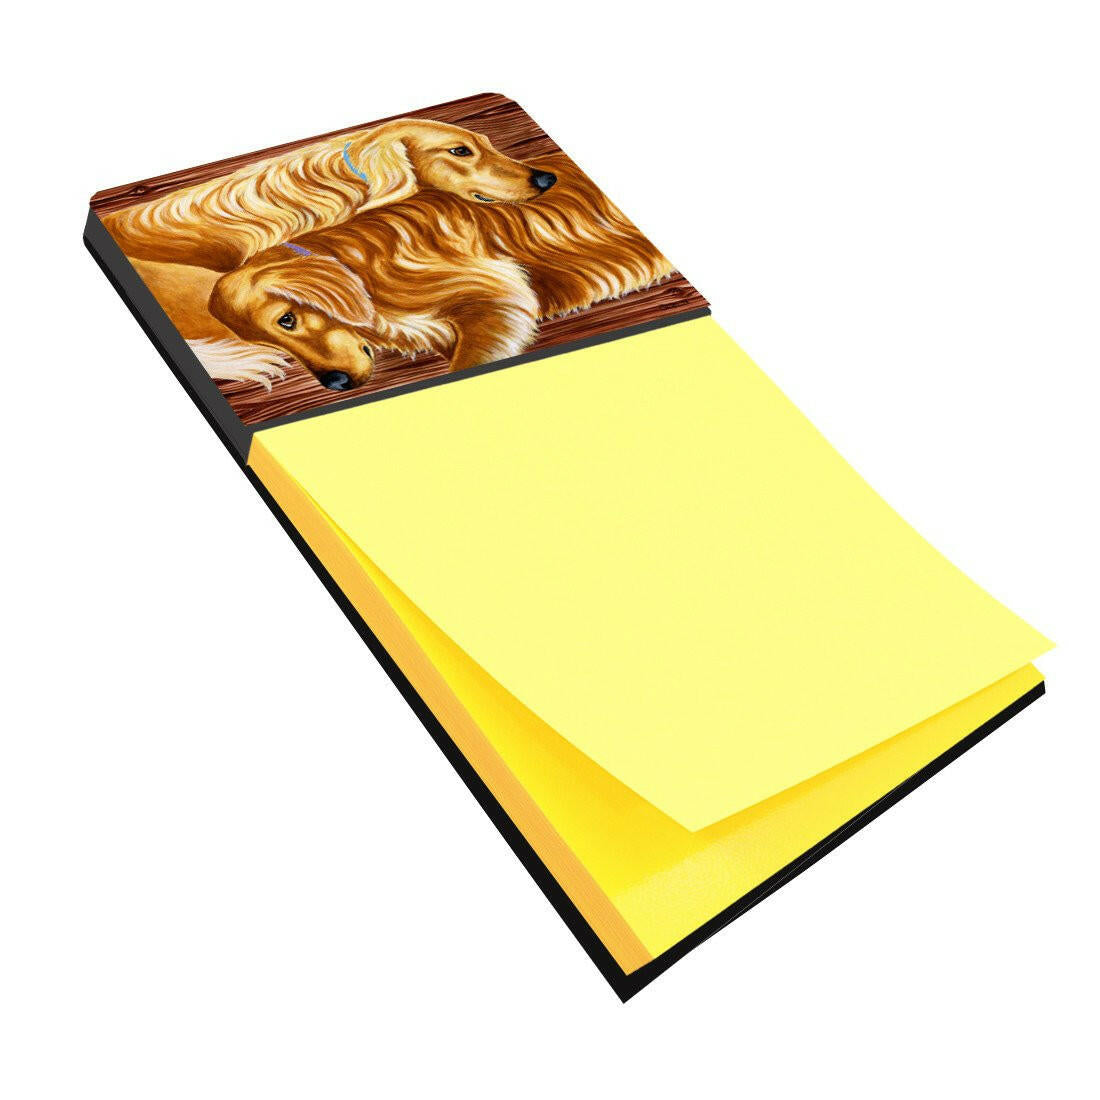 Zeus and Chloie the Golden Retrievers Sticky Note Holder AMB1387SN by Caroline's Treasures